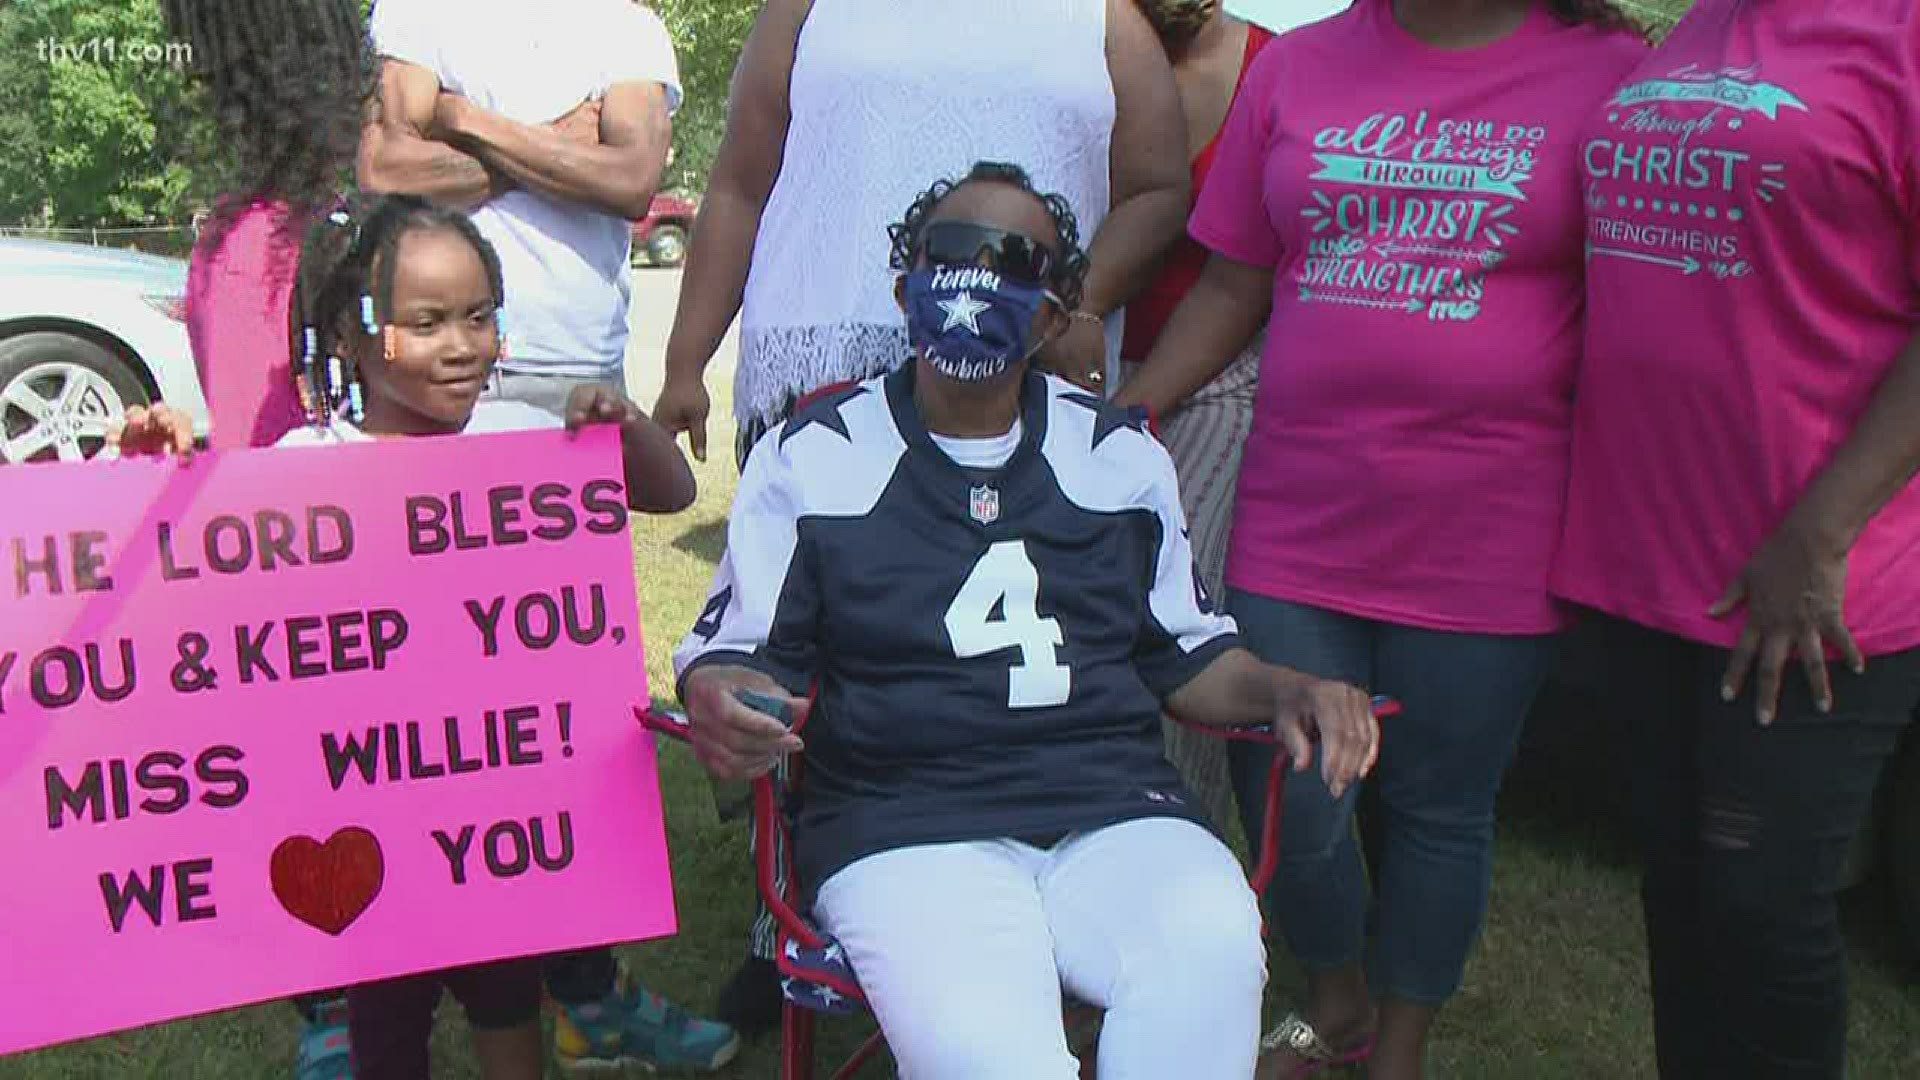 After 34 years in the Wrightsville Women's Facility, 72-year-old Willie Mae Harris has been released.